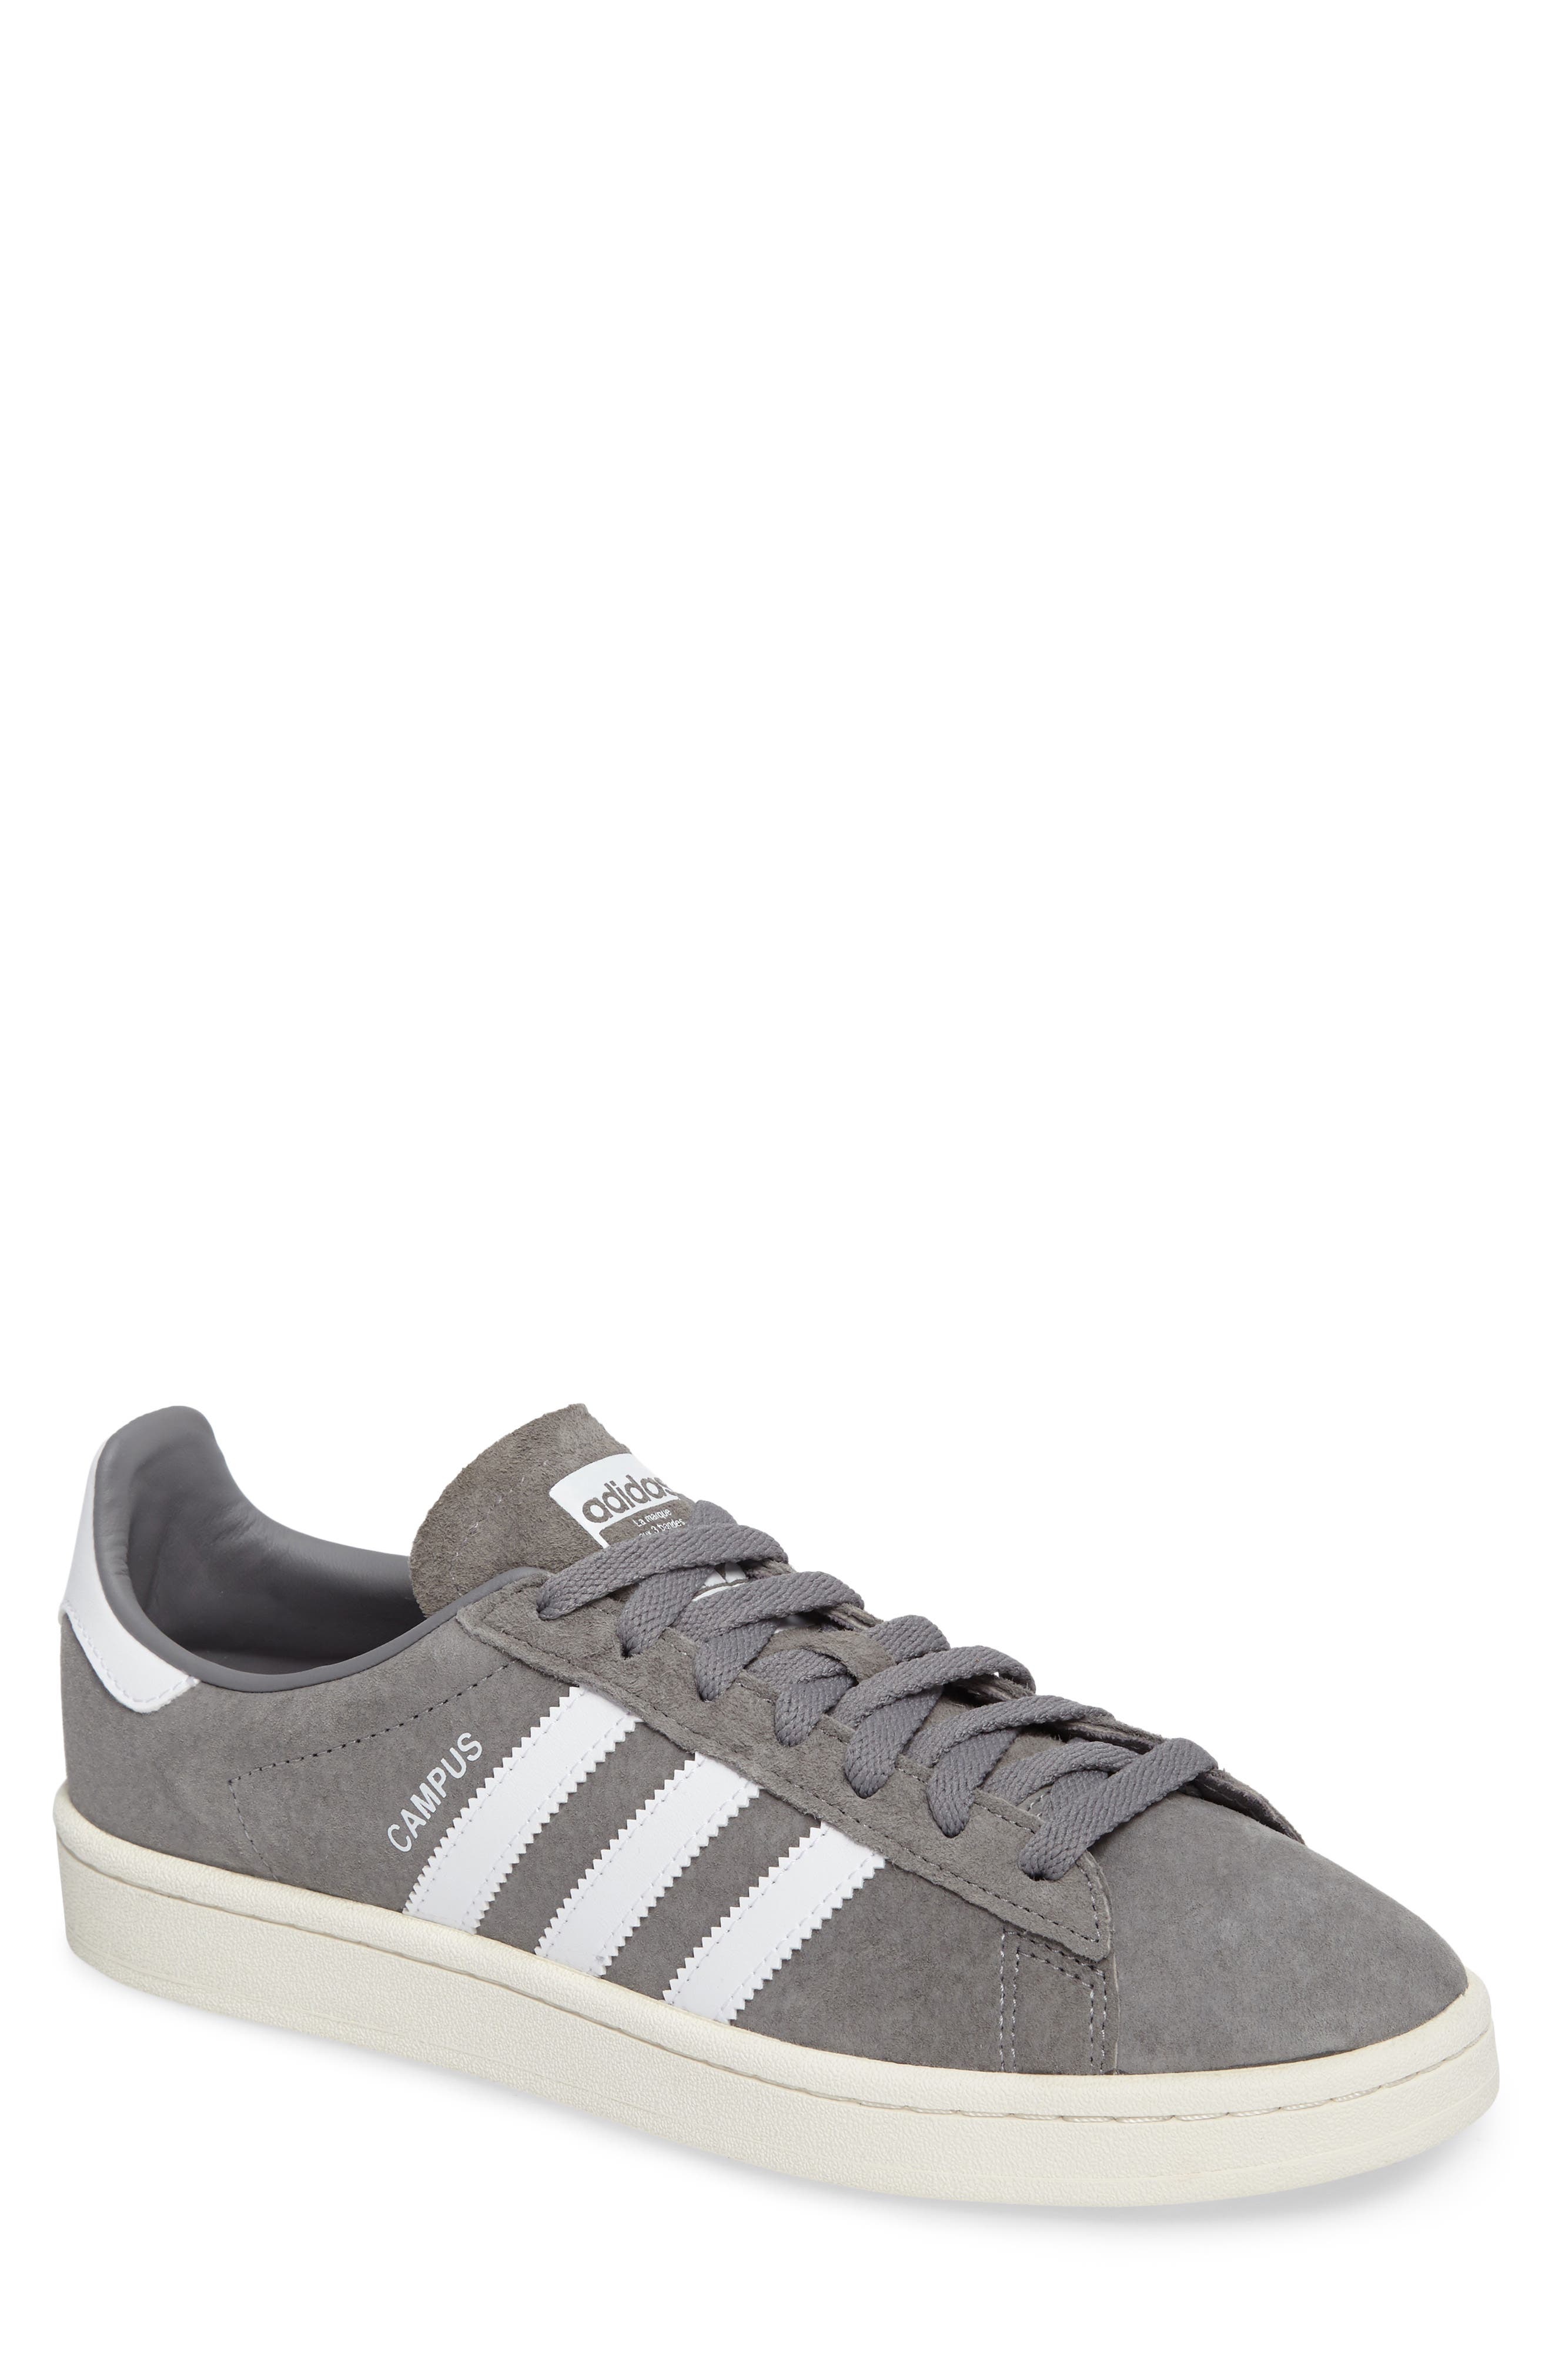 Men's Lace-Up Sneakers, Athletic 